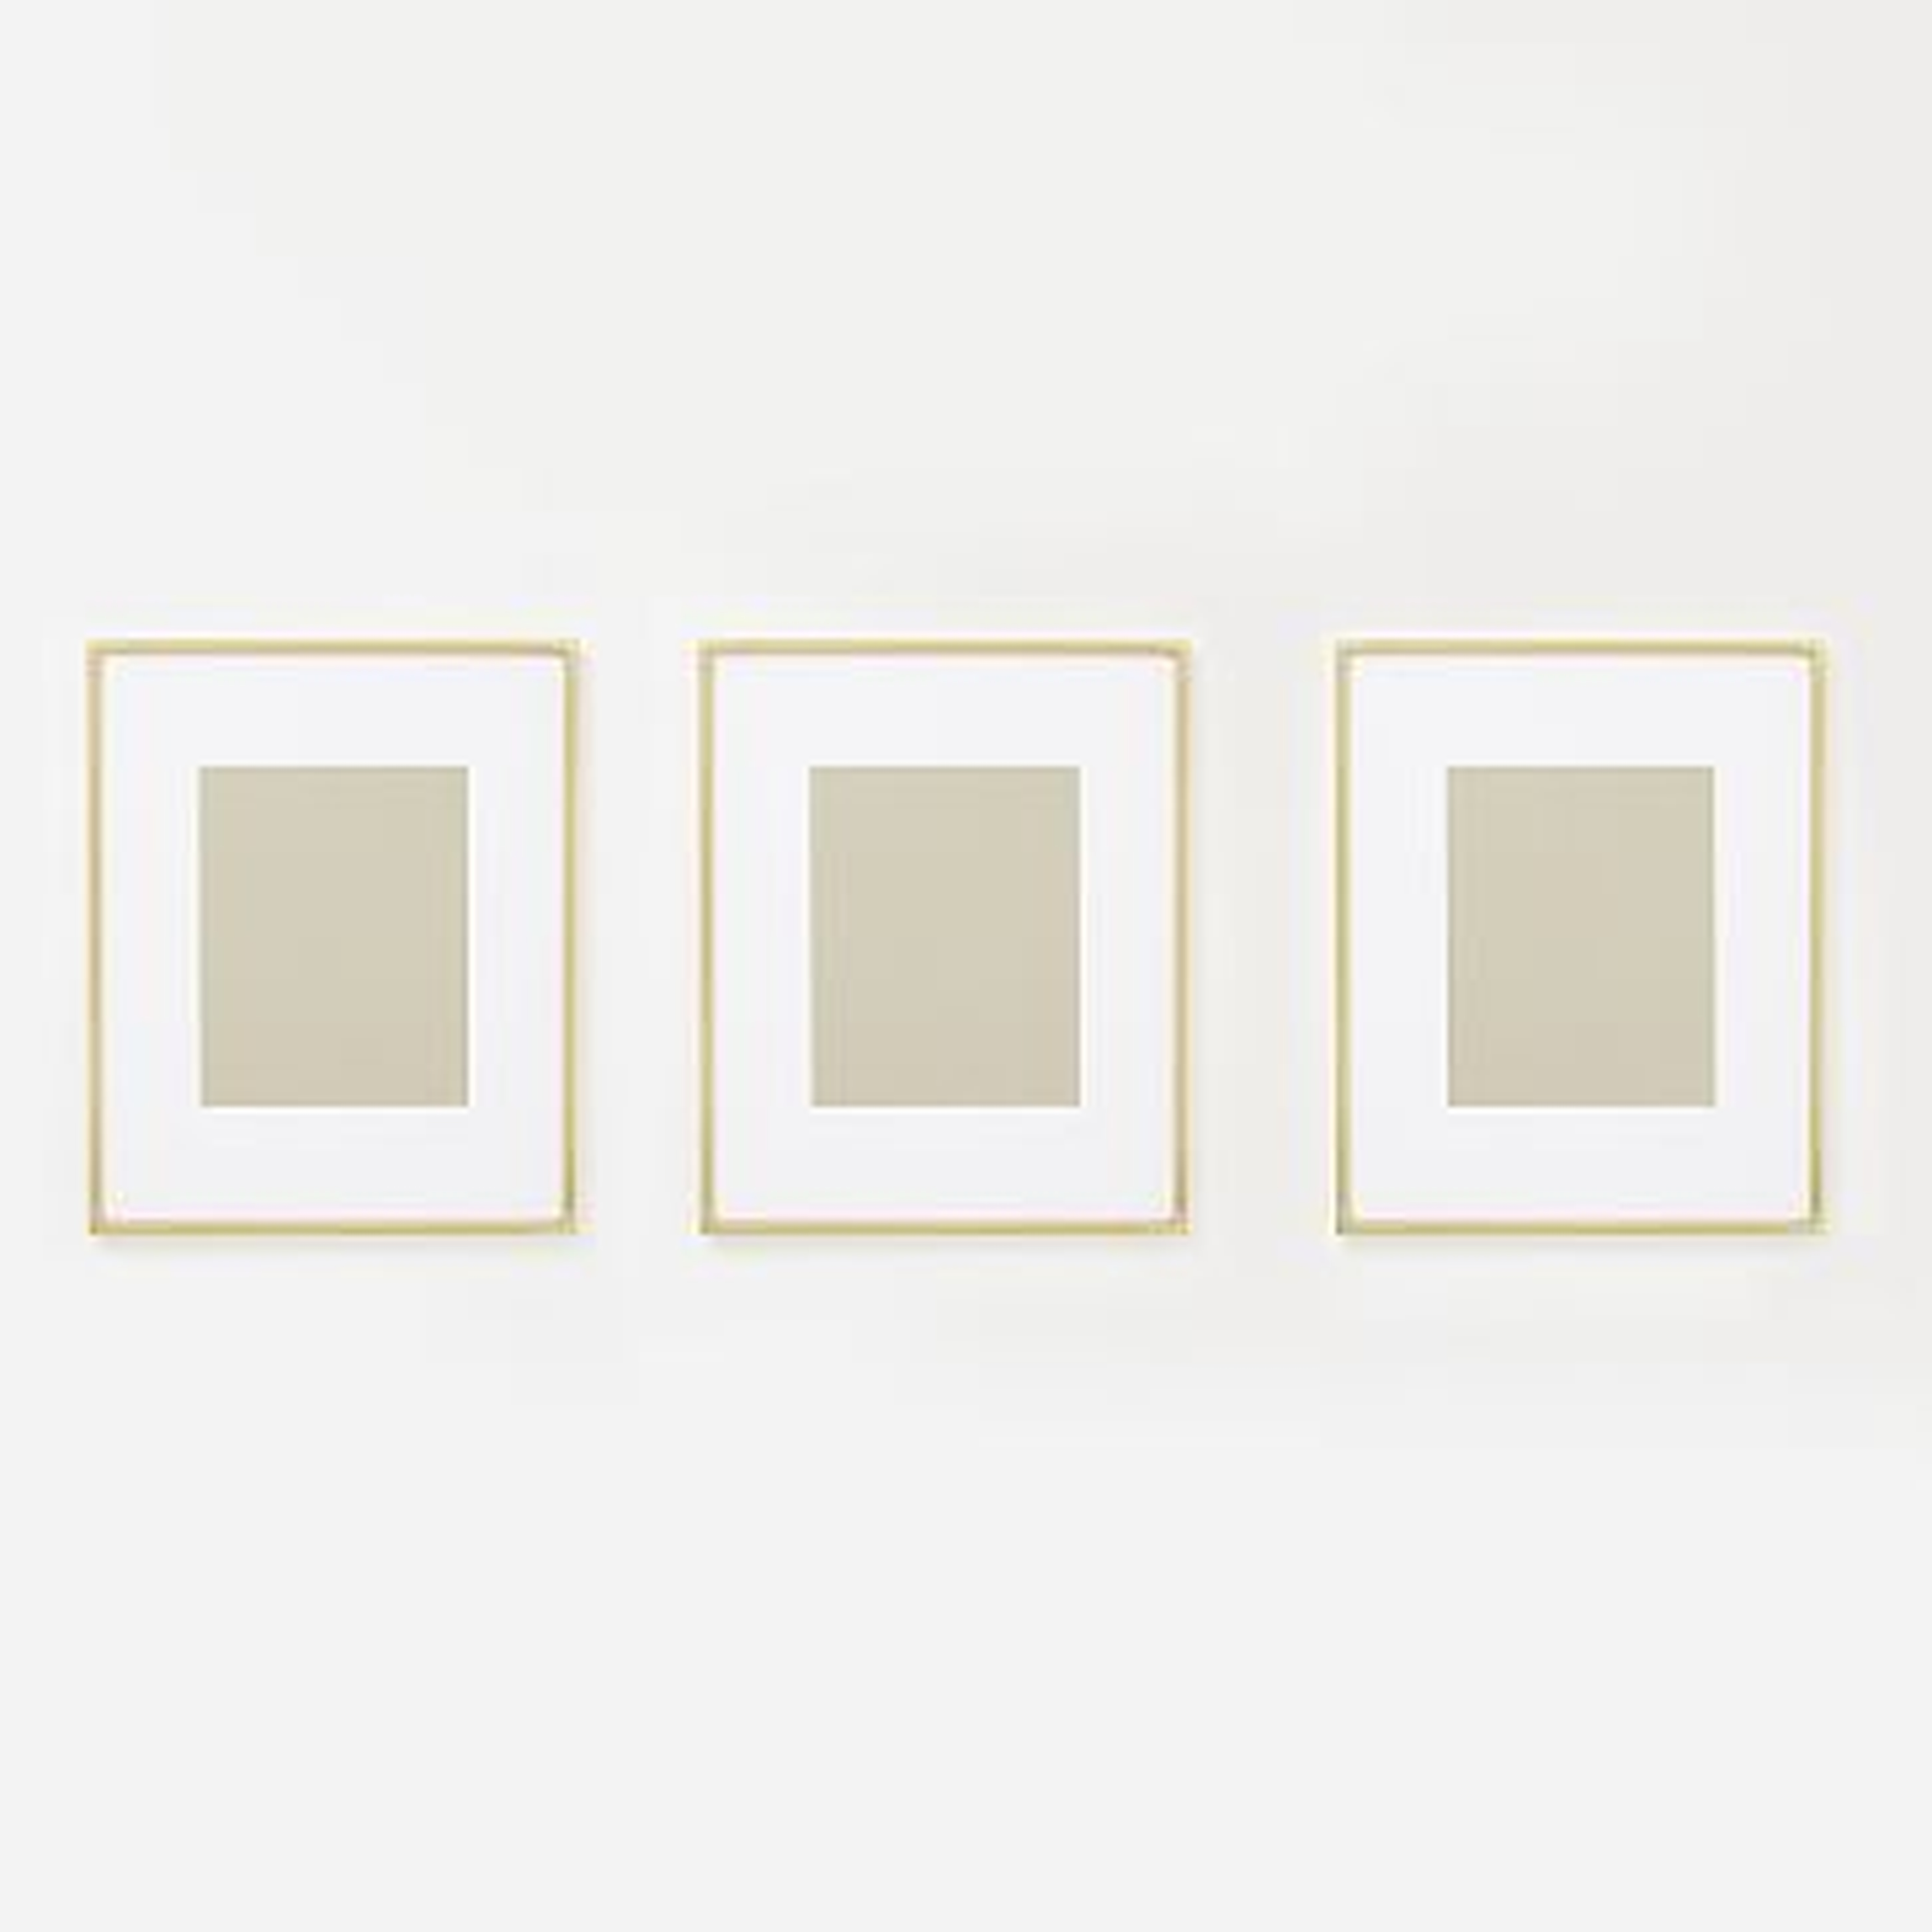 Gallery Frame, Polished Brass, Set of 3, 8" x 10" (13" x 16" without mat) - West Elm